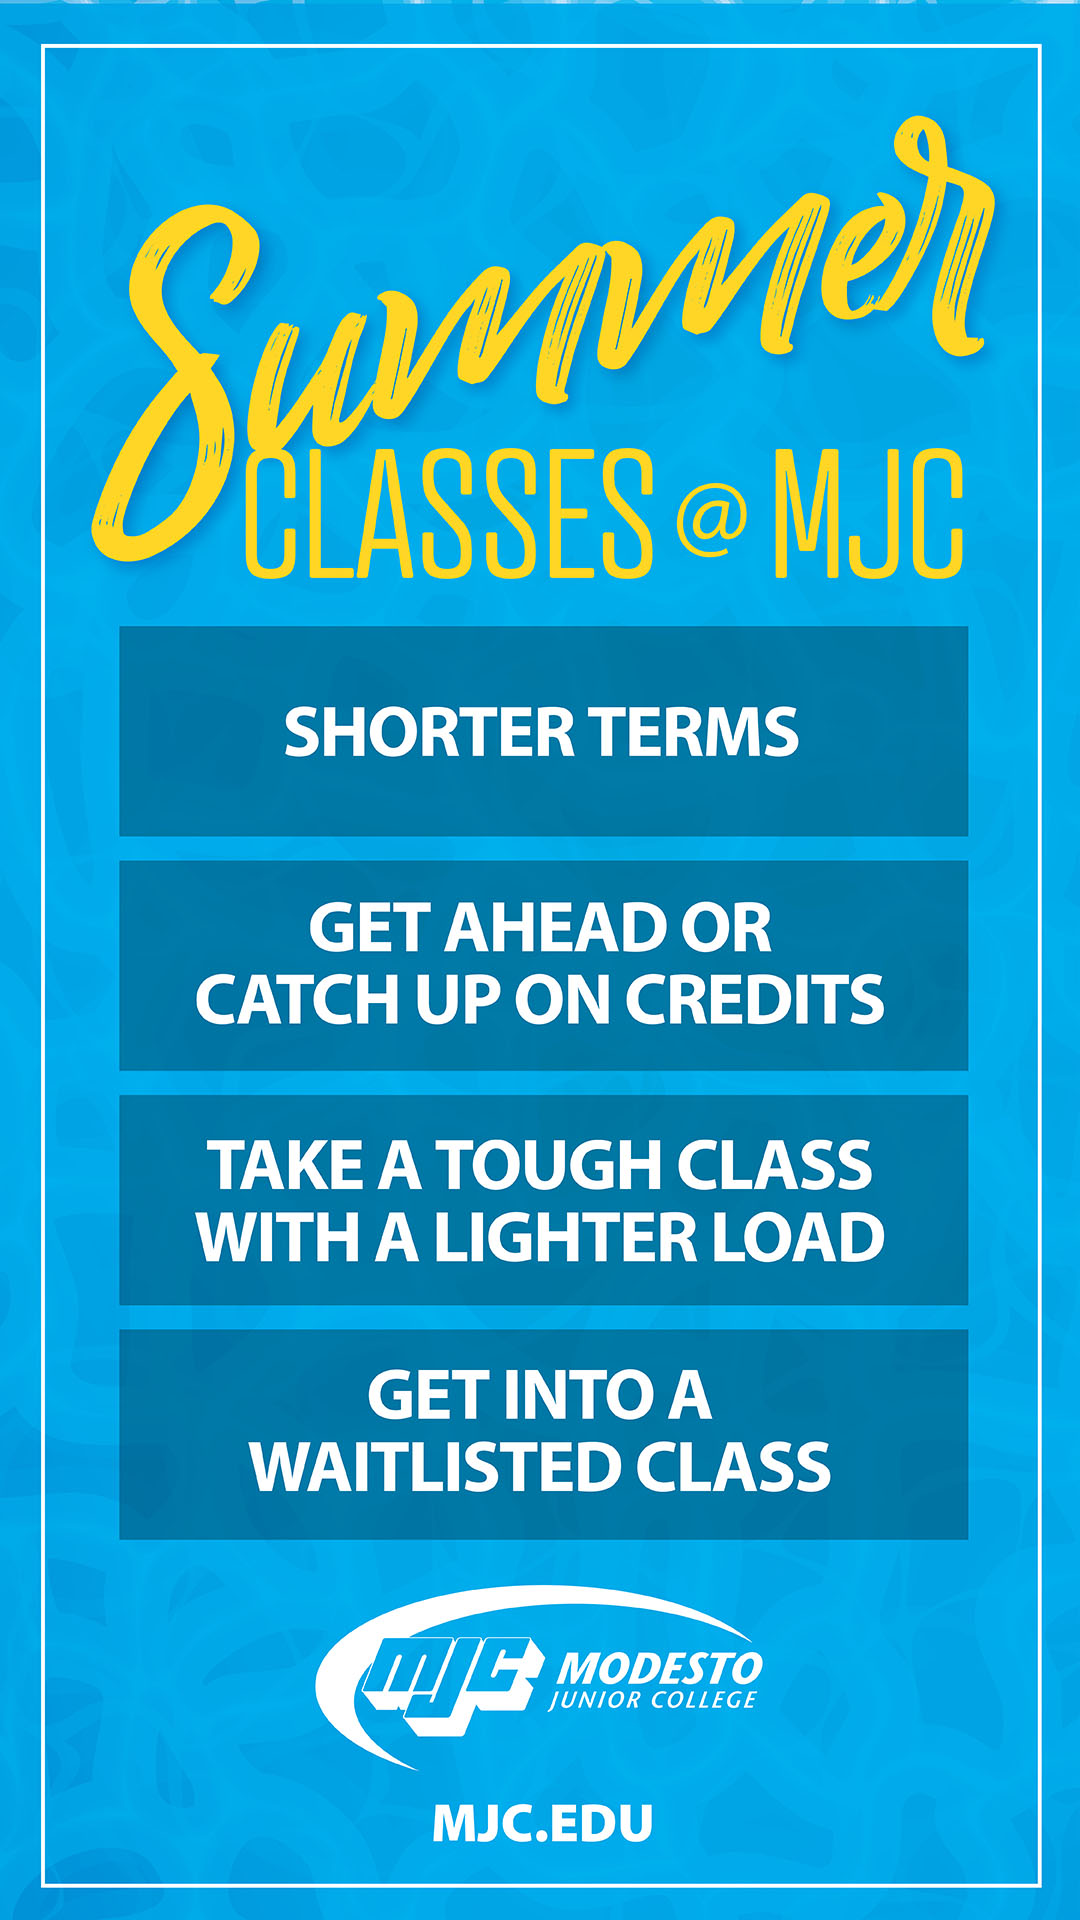 Summer Classes at MJC - Shorter Terms. Get ahead or catch up on credits. Take a tough class with a lighter load. Get into a waitlisted class.